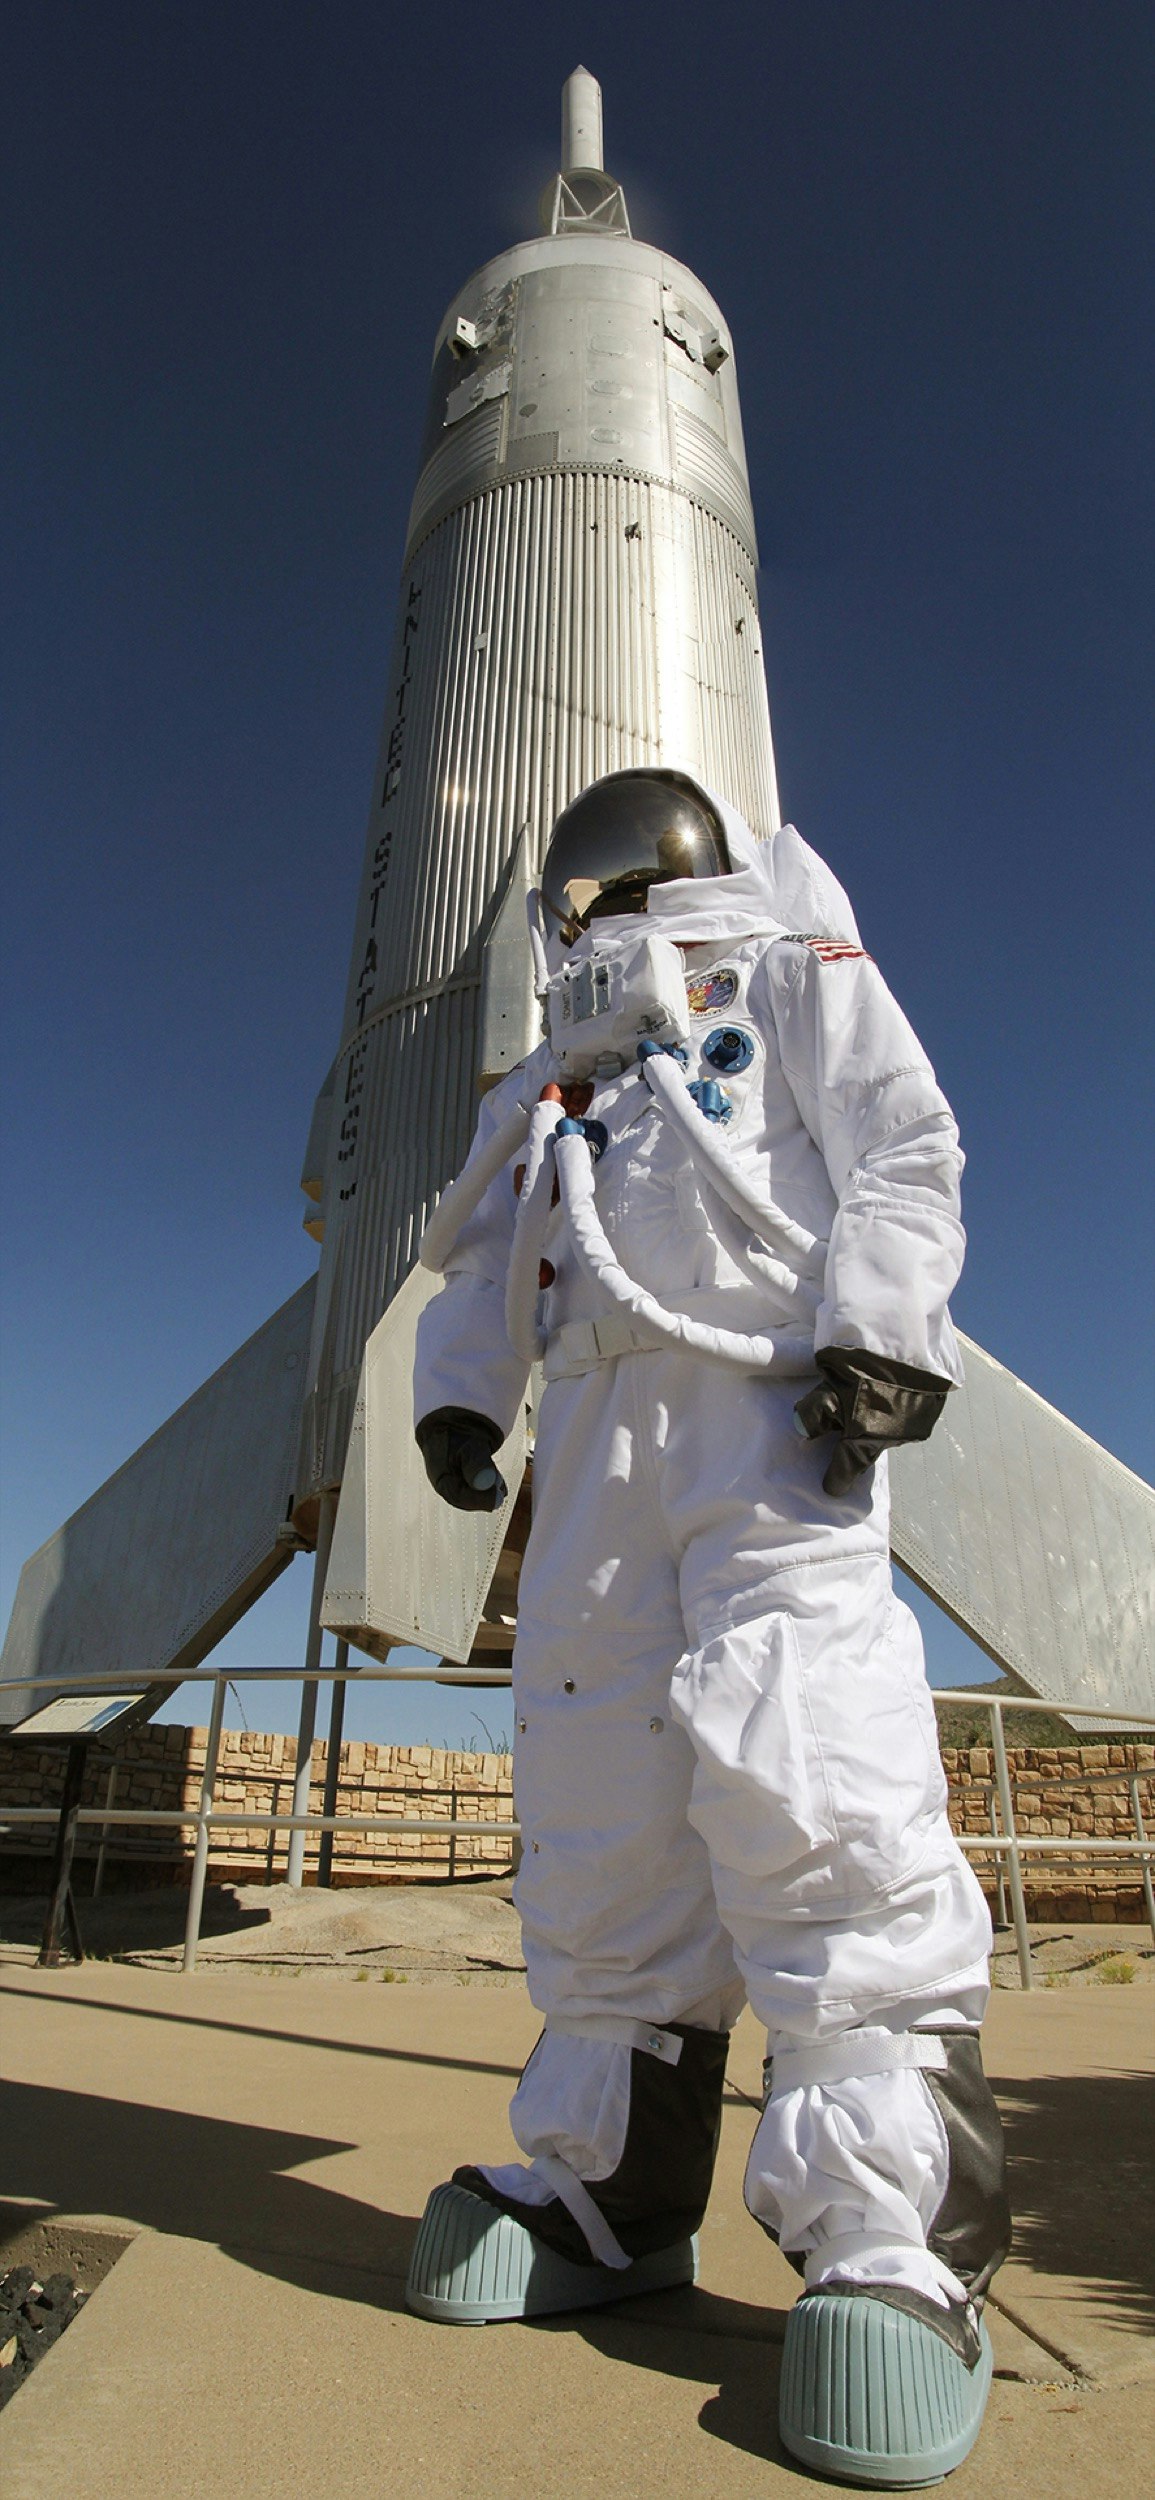 A space suit and rocket are seen in an outdoor exhibit at the New Mexico Museum of Space History